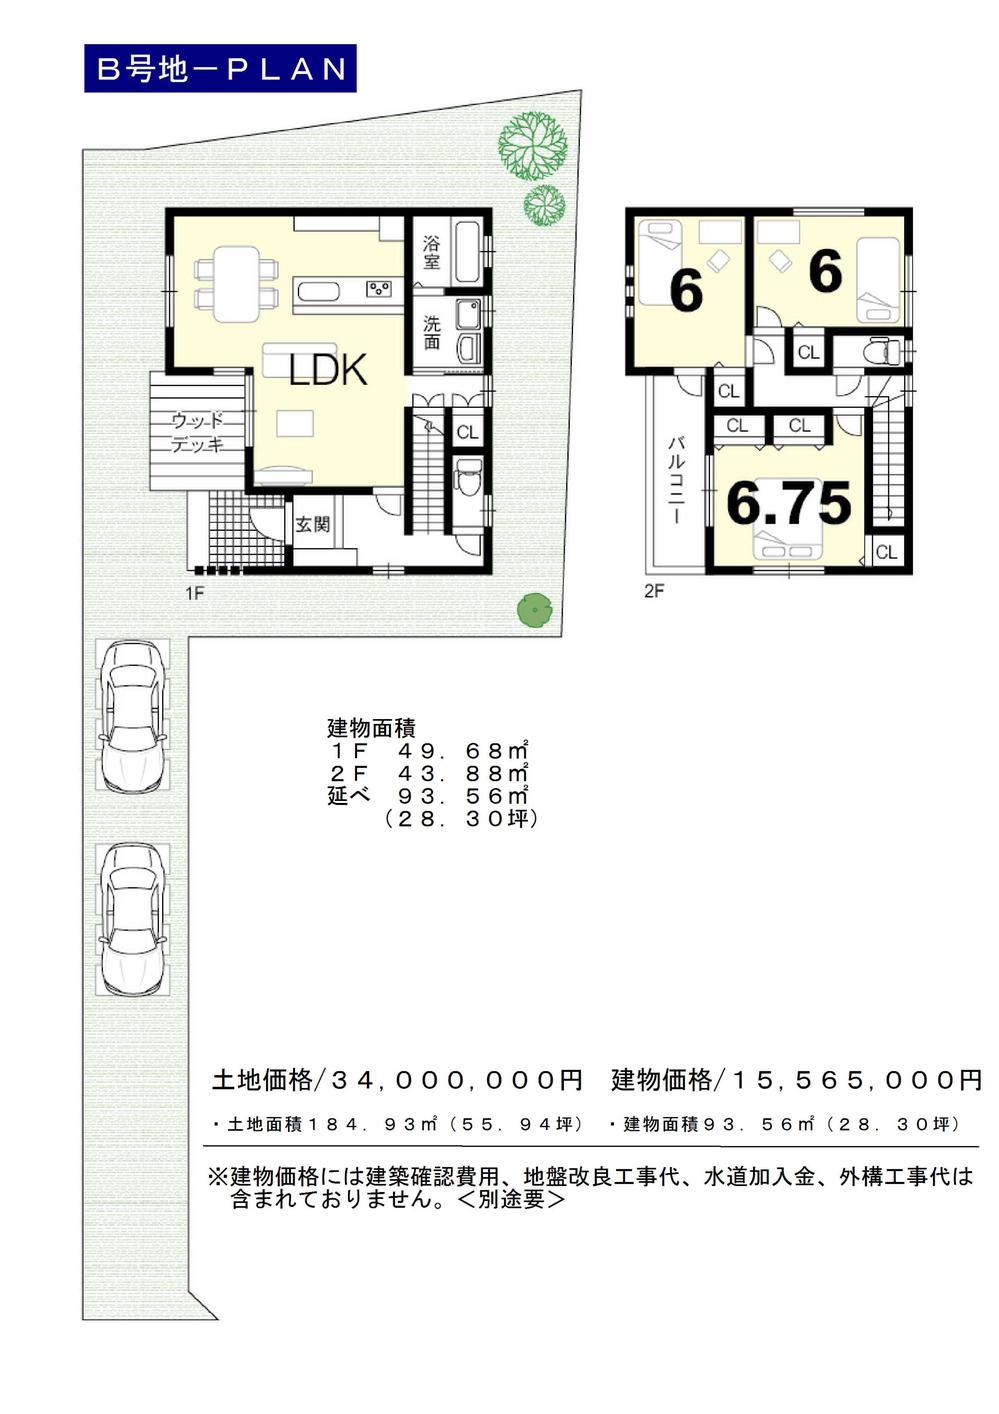 Other building plan example. Building plan example (B No. land) Building price 15,560,000 yen, Building area 93.56 sq m